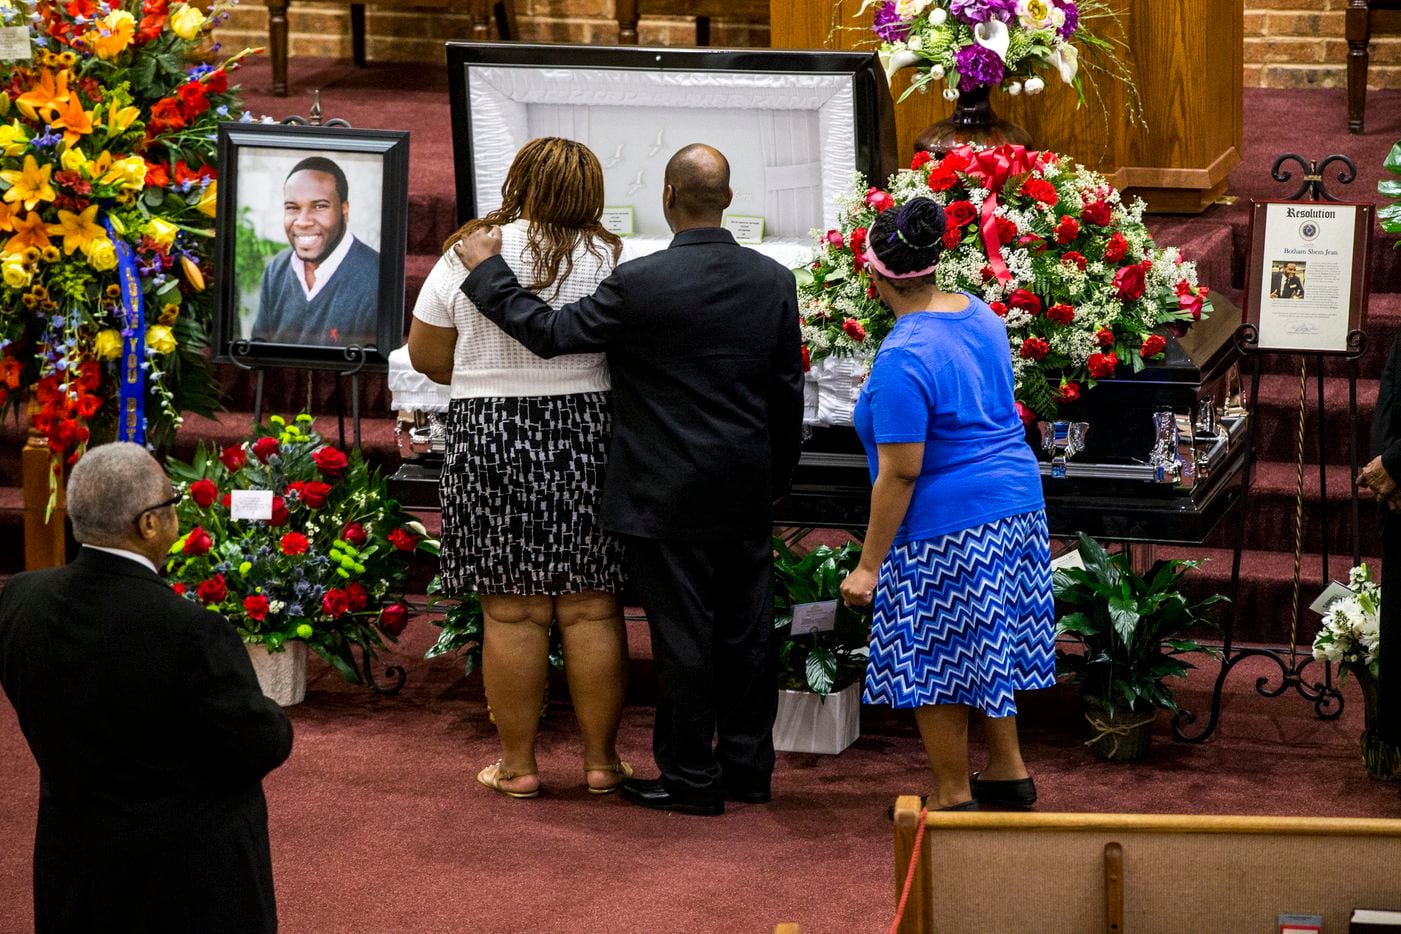 Mourners console each other during the public viewing before the funeral of Botham Shem Jean at the Greenville Avenue Church of Christ on Thursday, September 13, 2018 in Richardson, Texas. He was shot and killed by a Dallas police officer in his apartment last week in Dallas. (Shaban Athuman/ The Dallas Morning News)